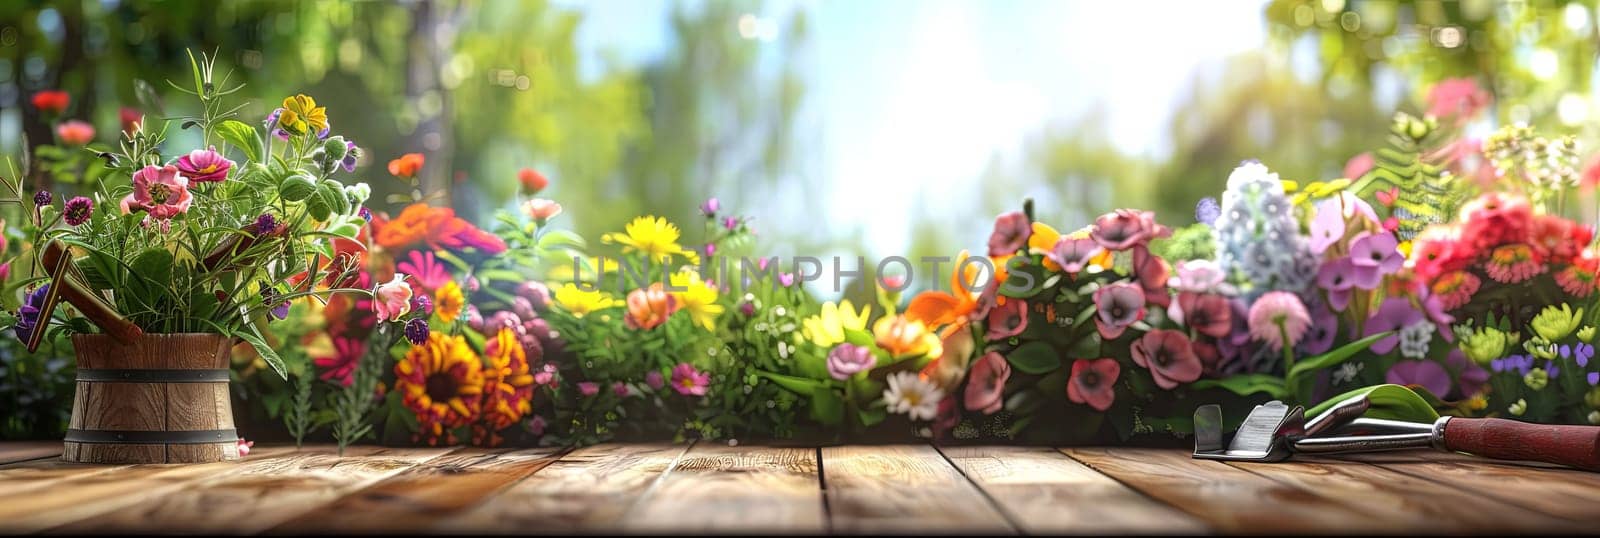 A wooden table covered with a variety of colorful flowers and garden tools, set against a blurred natural background.